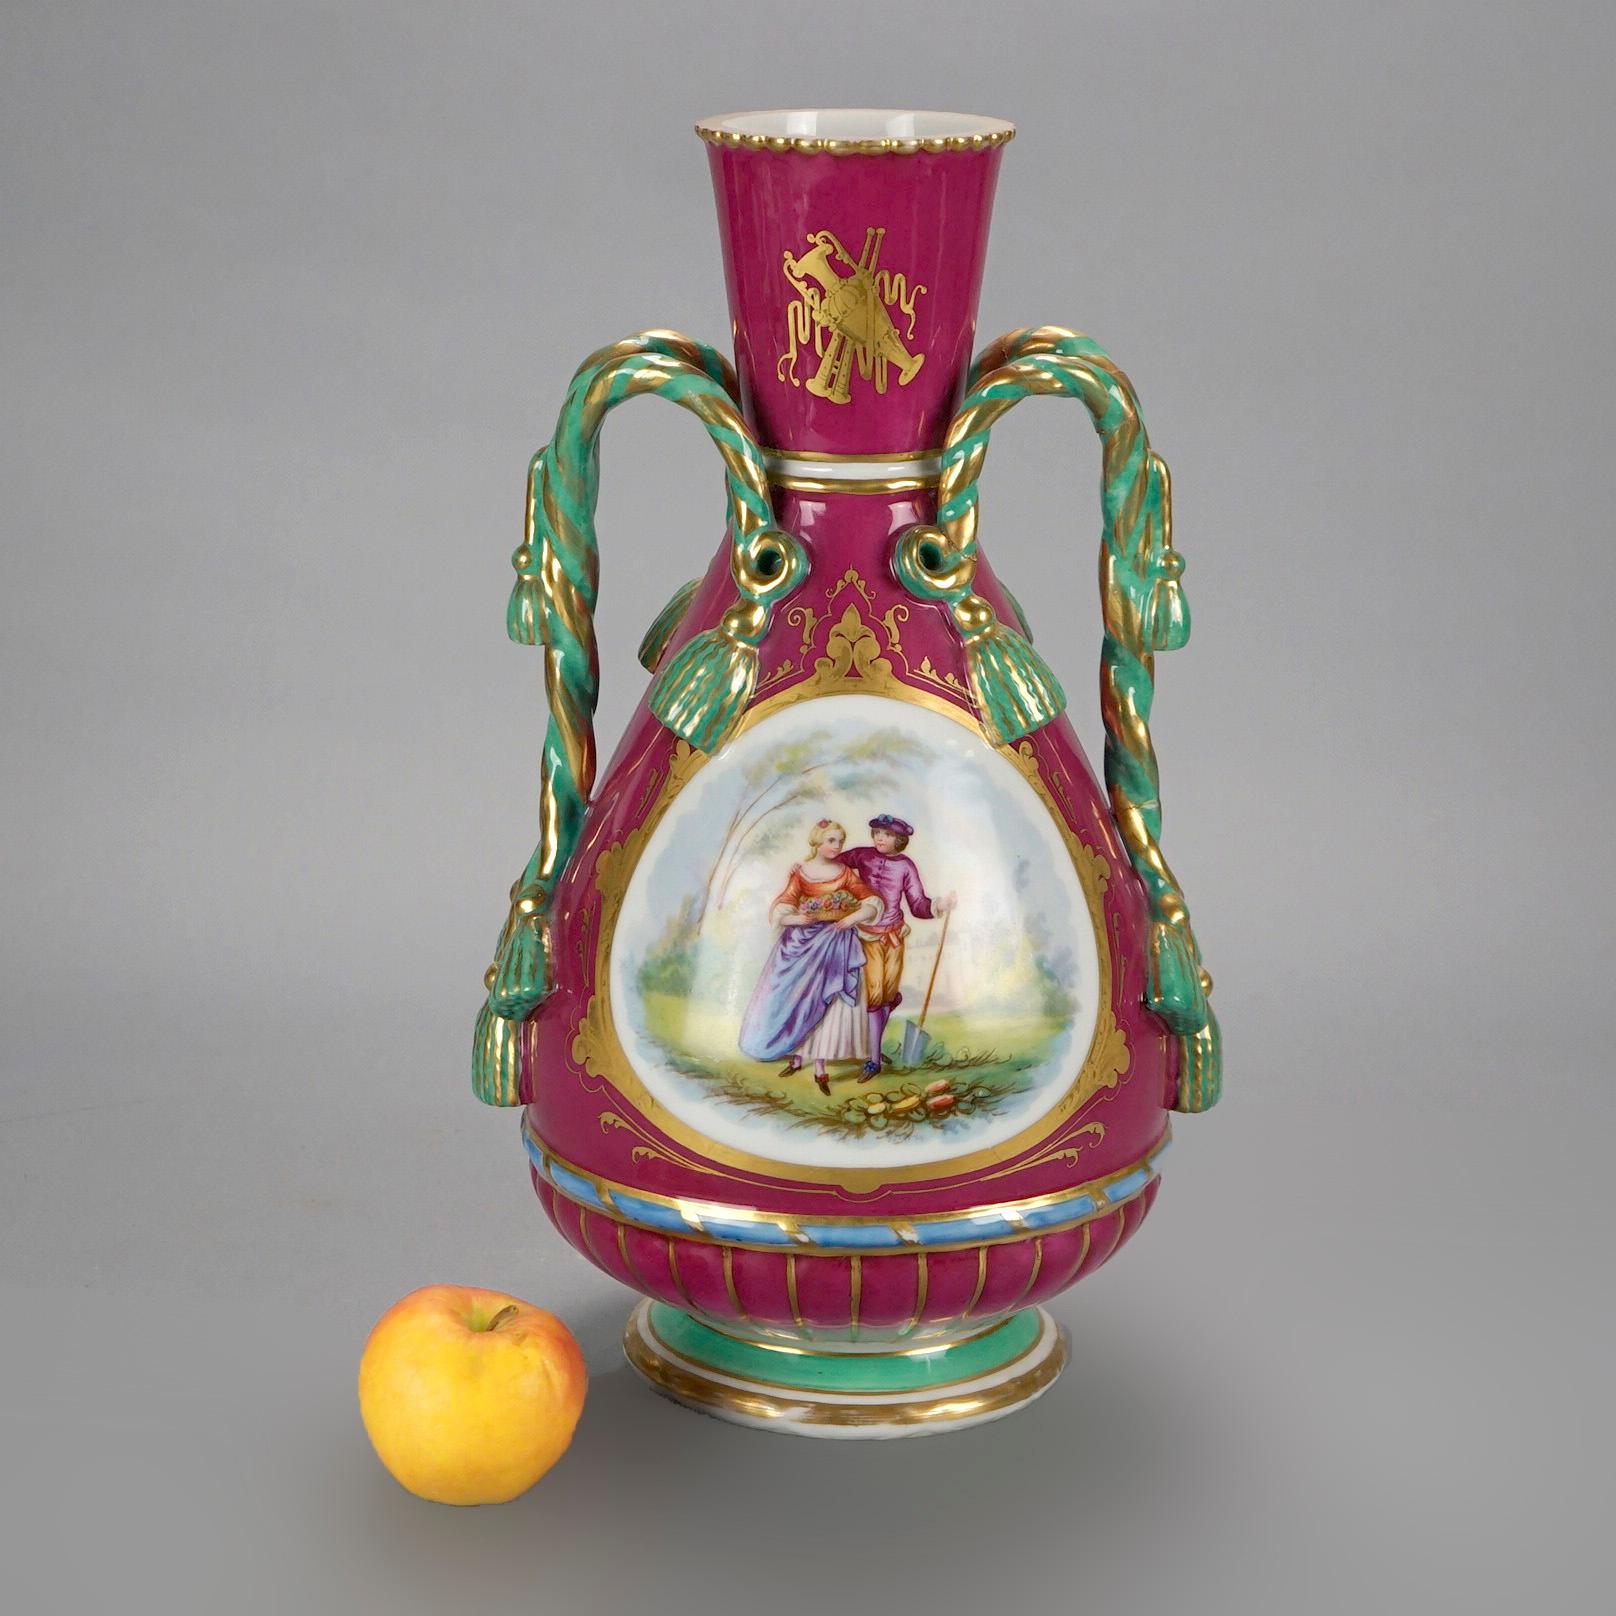 An antique and large French Old Paris vase offers porcelain construction with hand painted genre reserve depicting courting couple in countryside setting, gilt highlights throughout and flanking tassel form handles, 19th century

Measures- 15'' H x